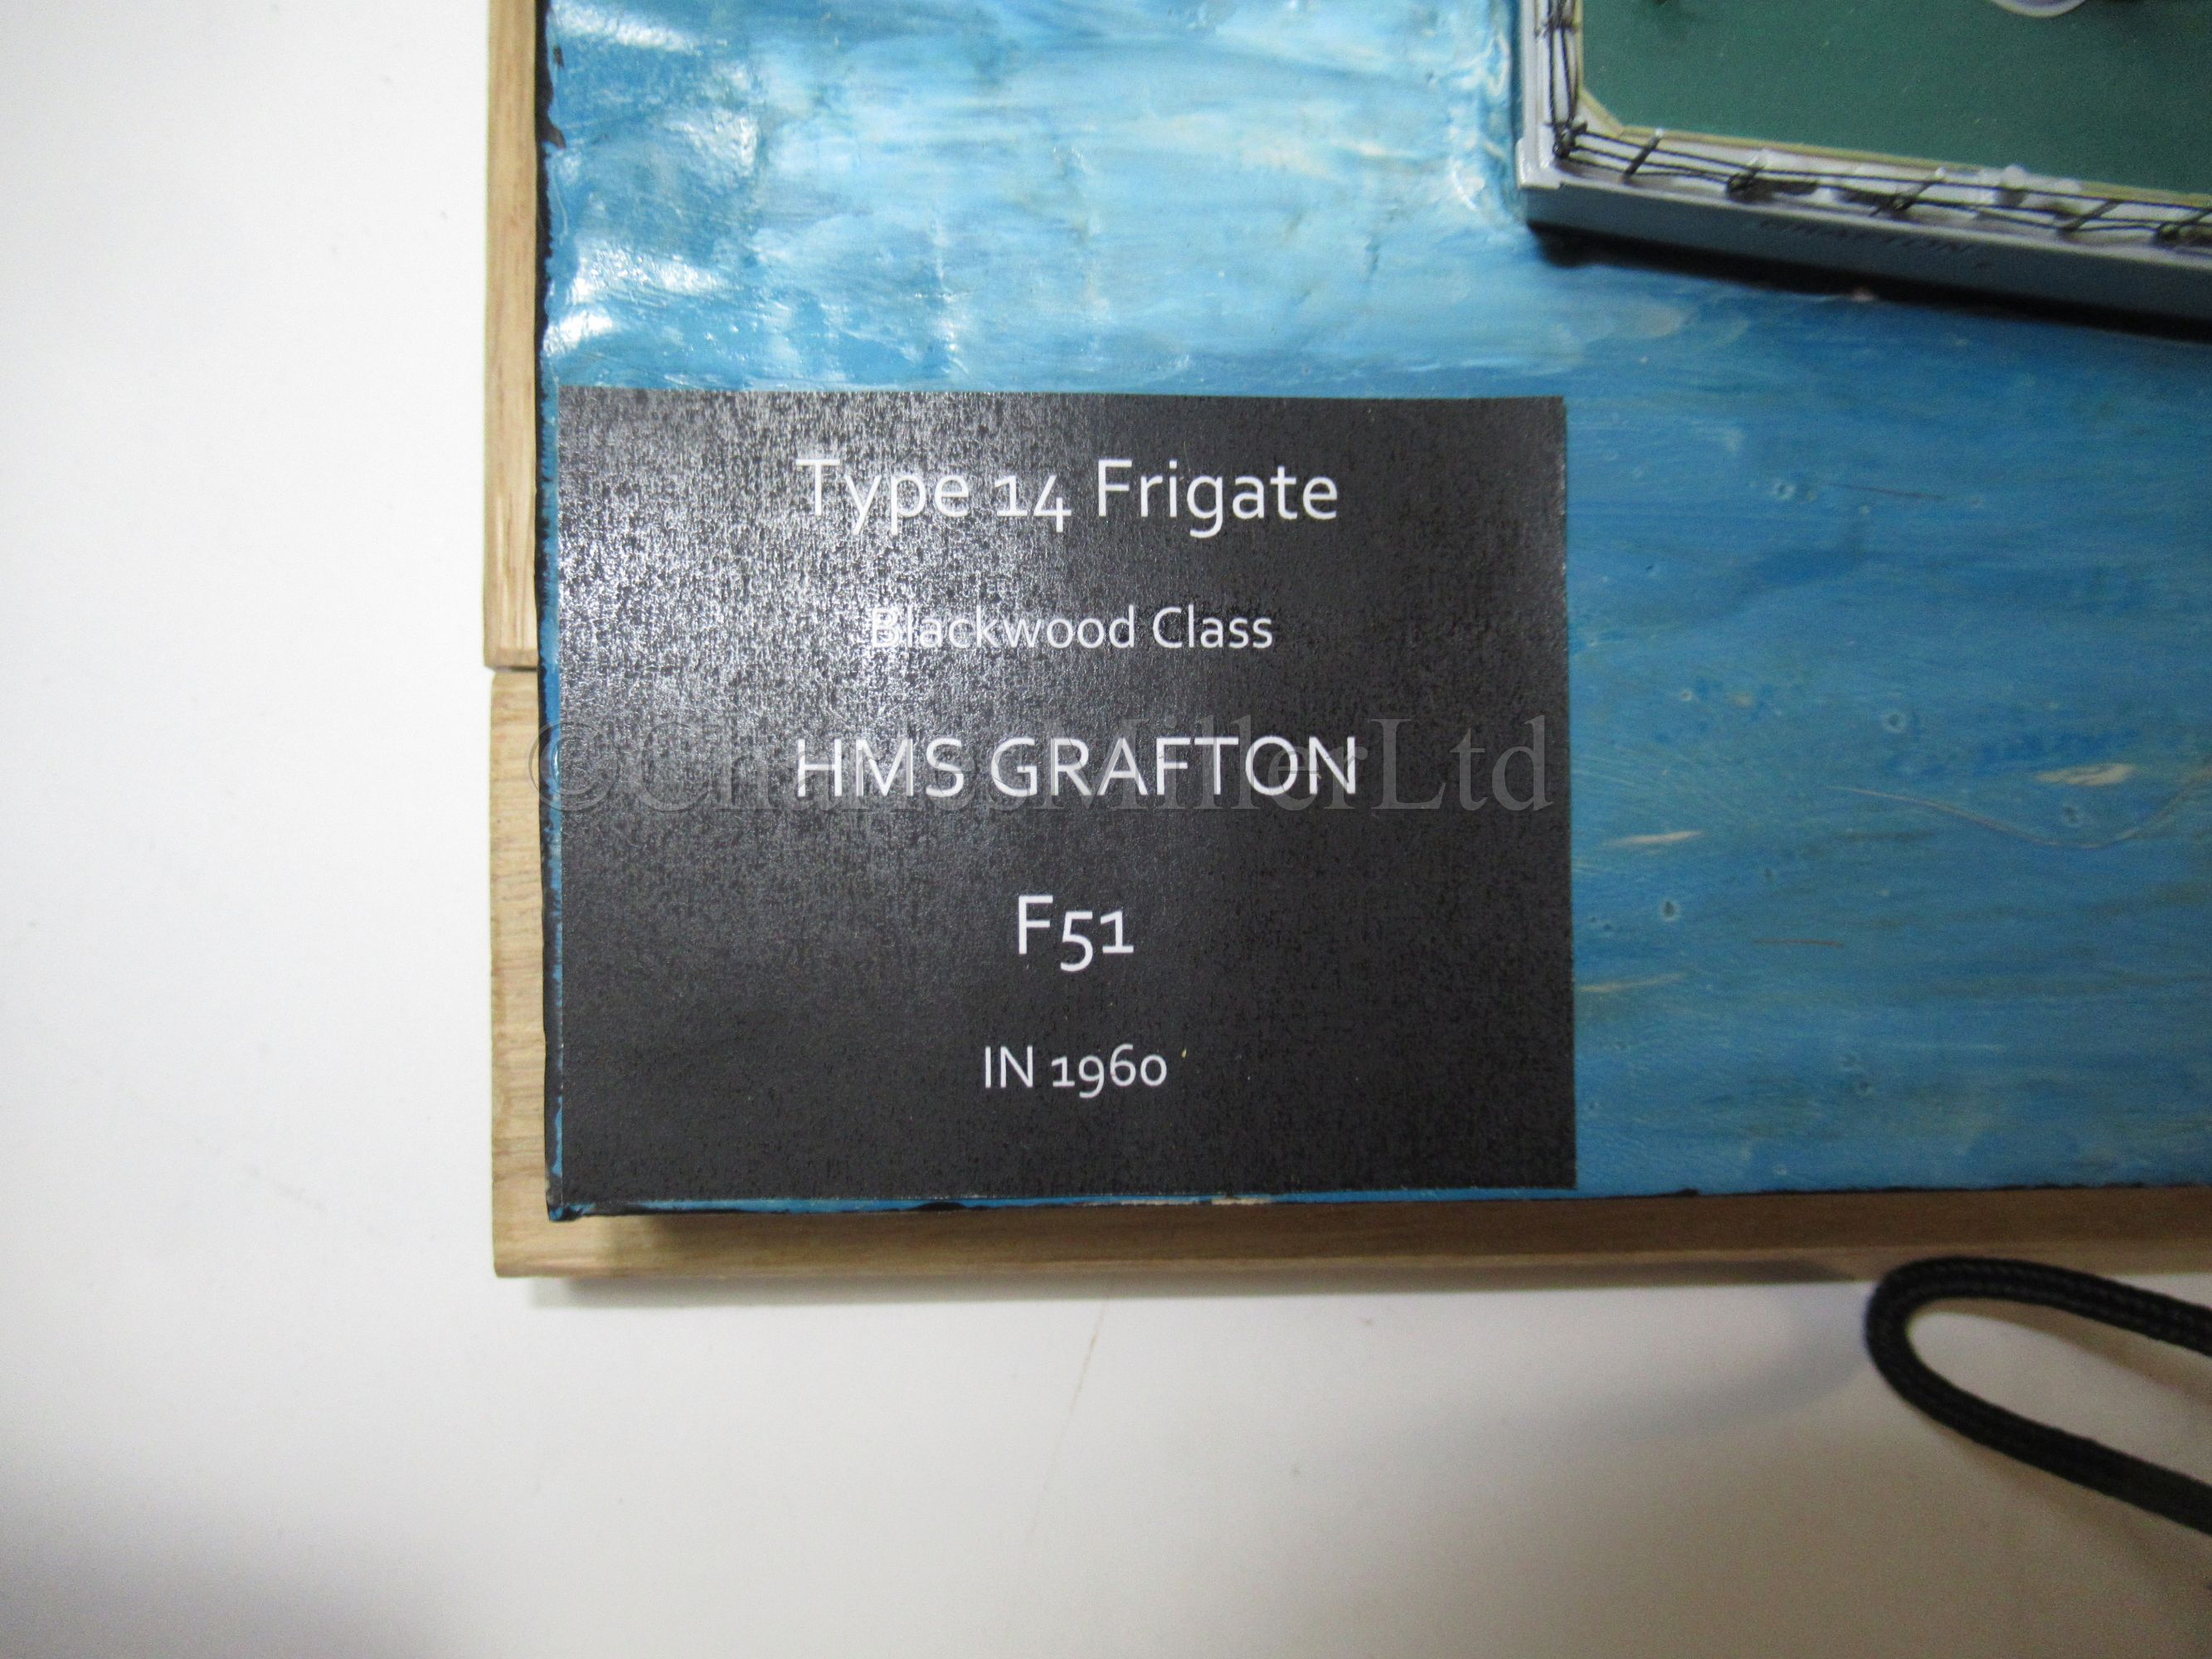 A 1:192 WATERLINE MODEL FOR THE TYPE 14 BLACKWOOD CLASS FRIGATE HMS GRAFTON (F51), AS FITTED IN - Image 2 of 14